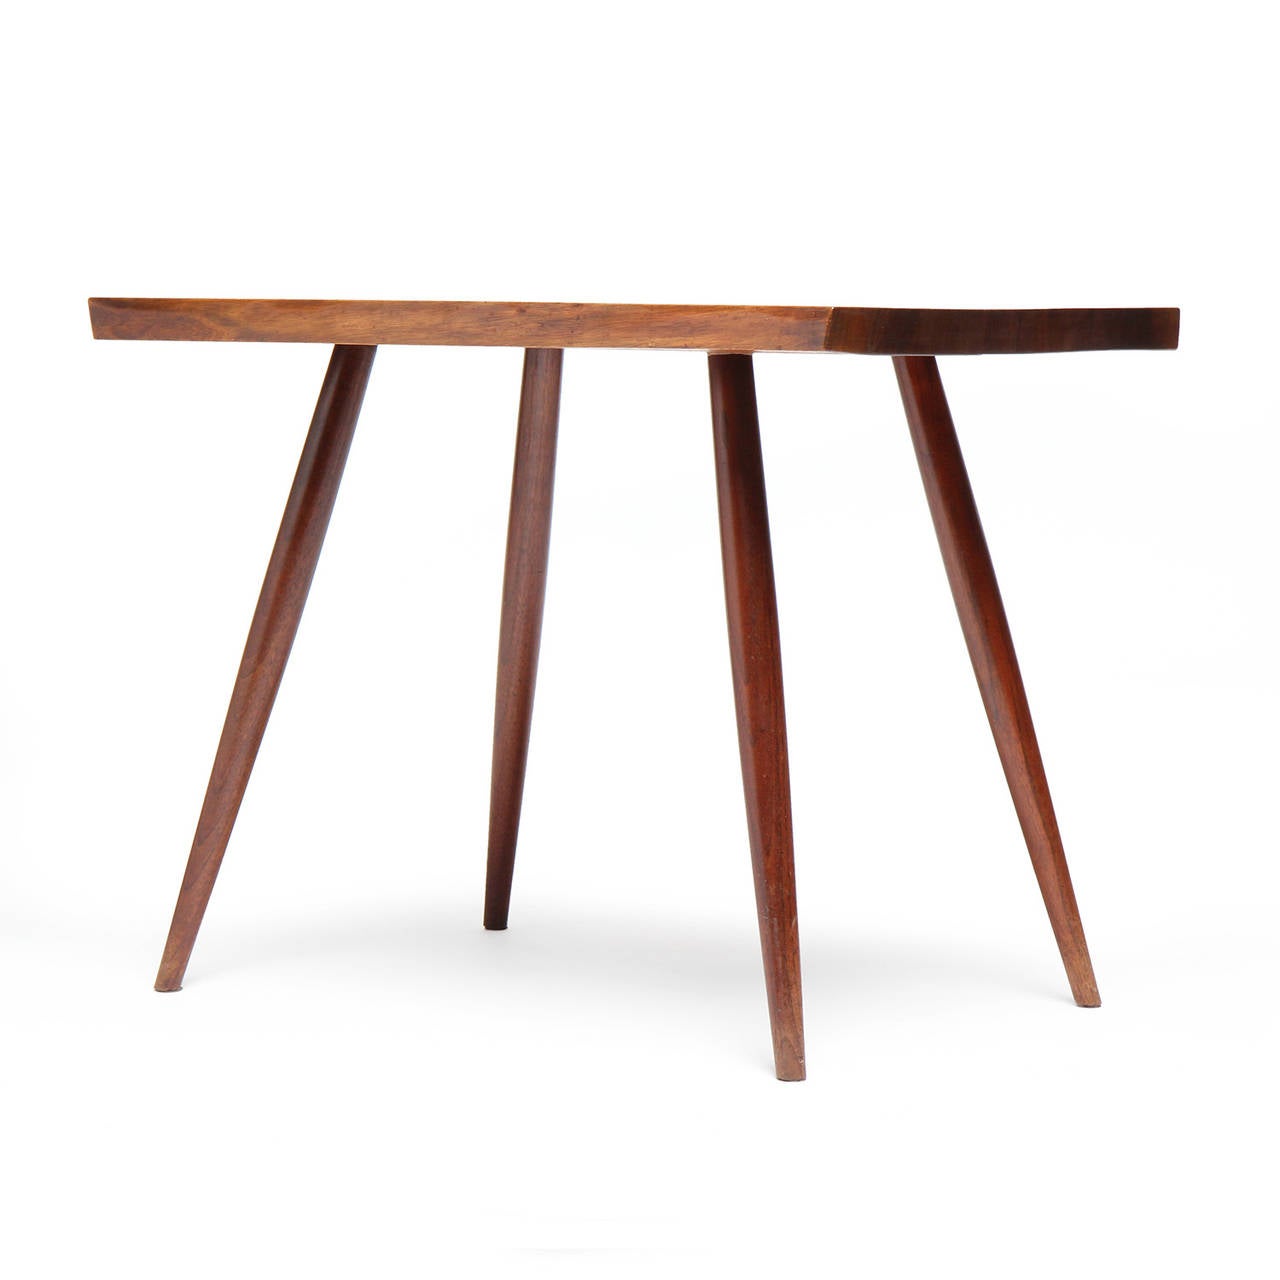 American Craftsman Studio Made Side Table by George Nakashima